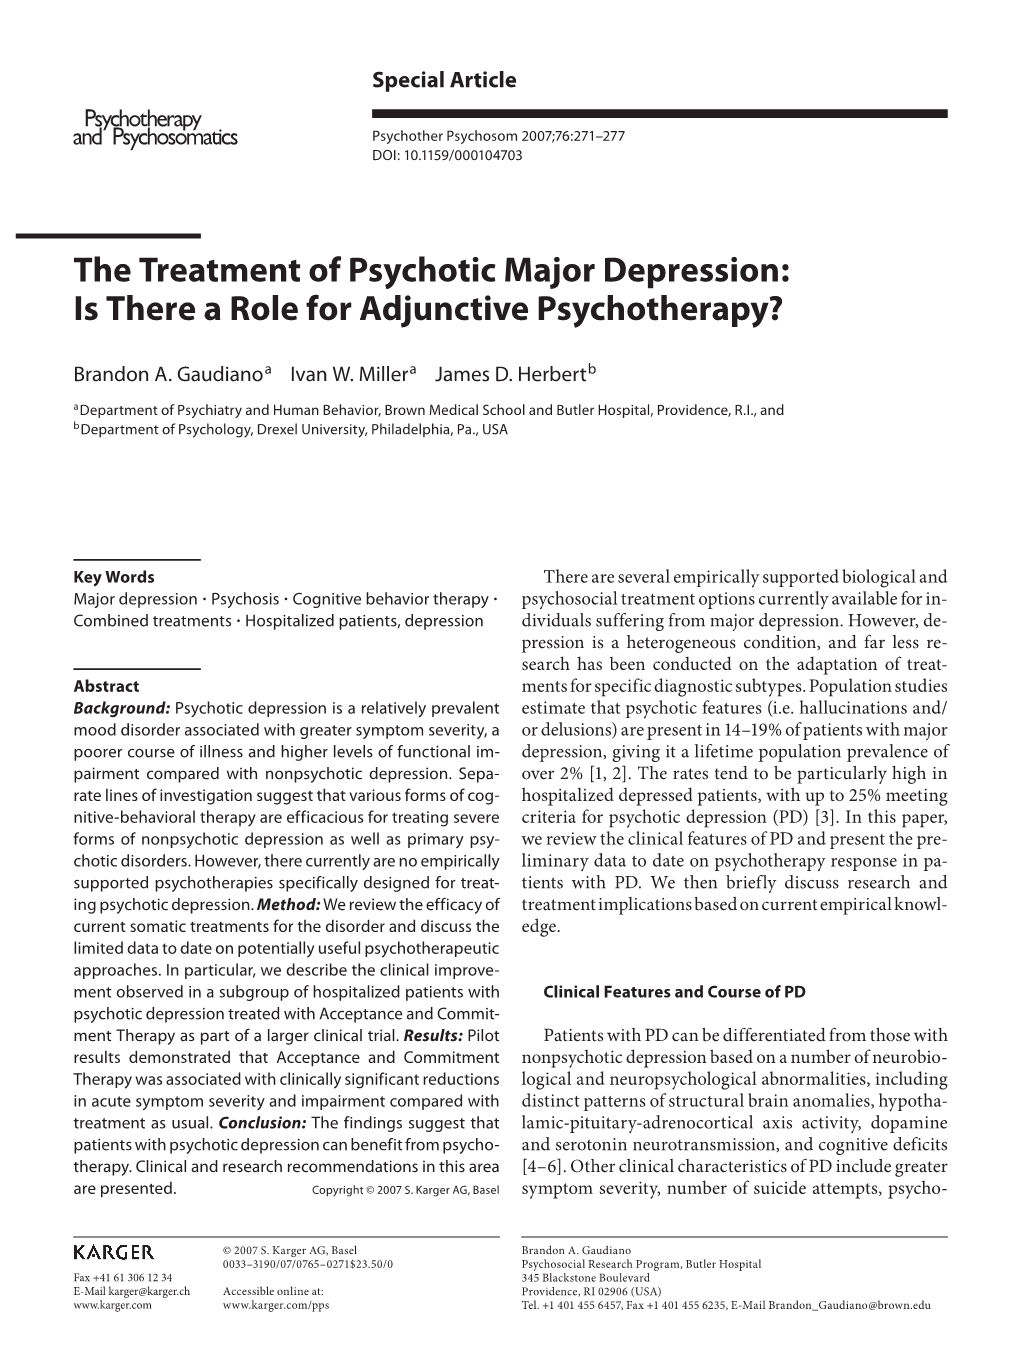 The Treatment of Psychotic Major Depression: Is There a Role for Adjunctive Psychotherapy?